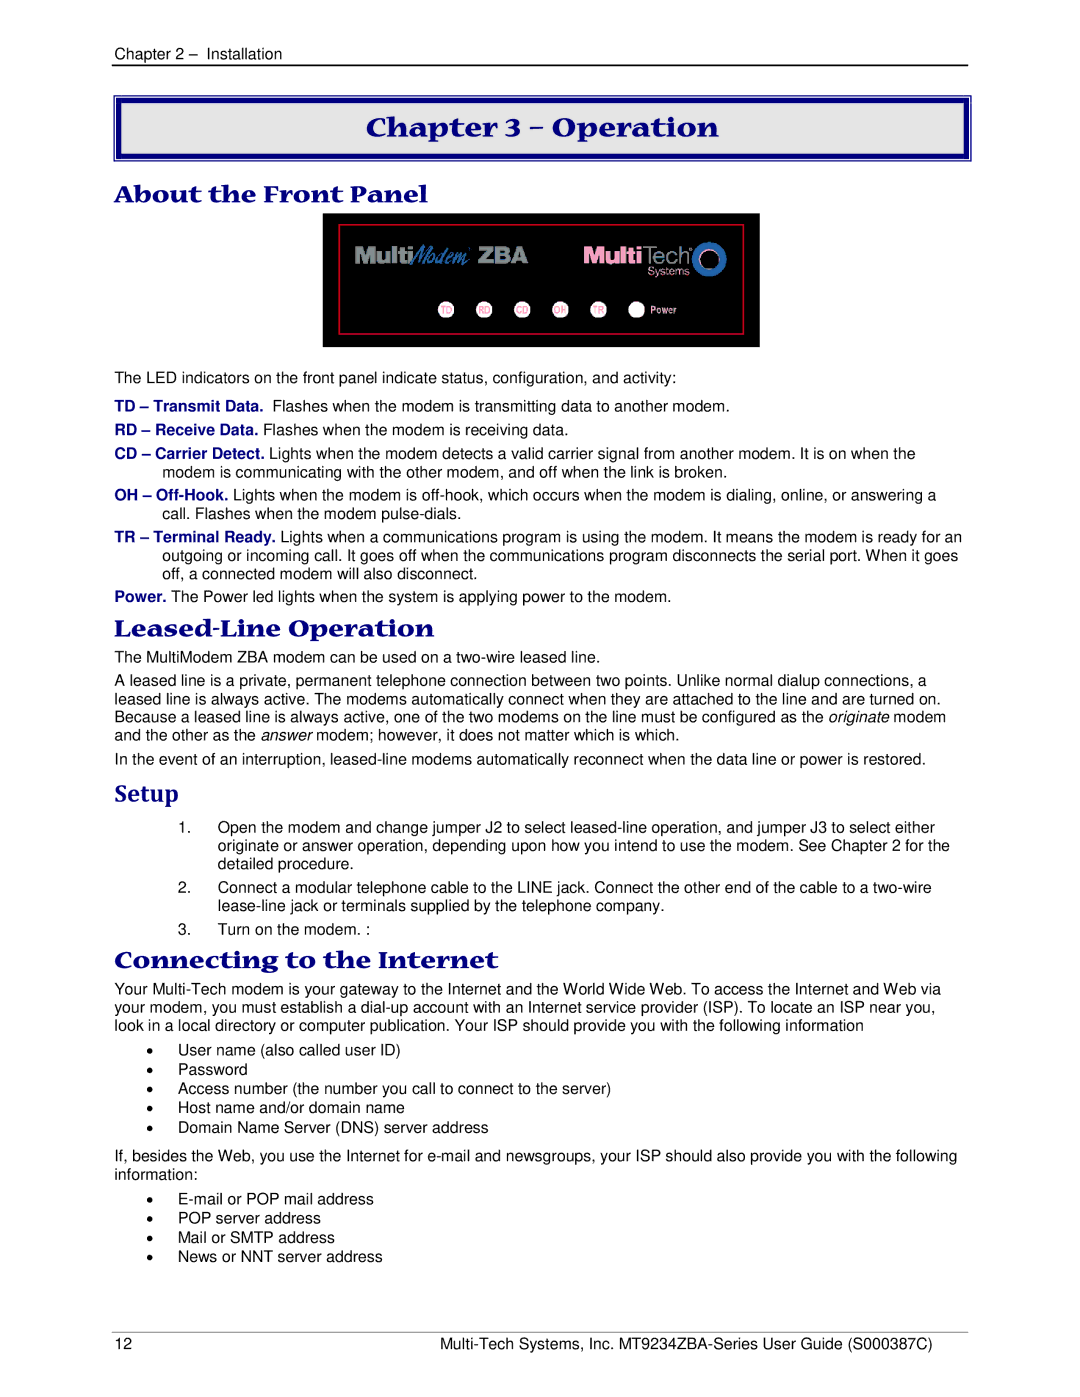 Multi-Tech Systems MT9234ZBA-V manual About the Front Panel, Leased-Line Operation, Setup, Connecting to the Internet 